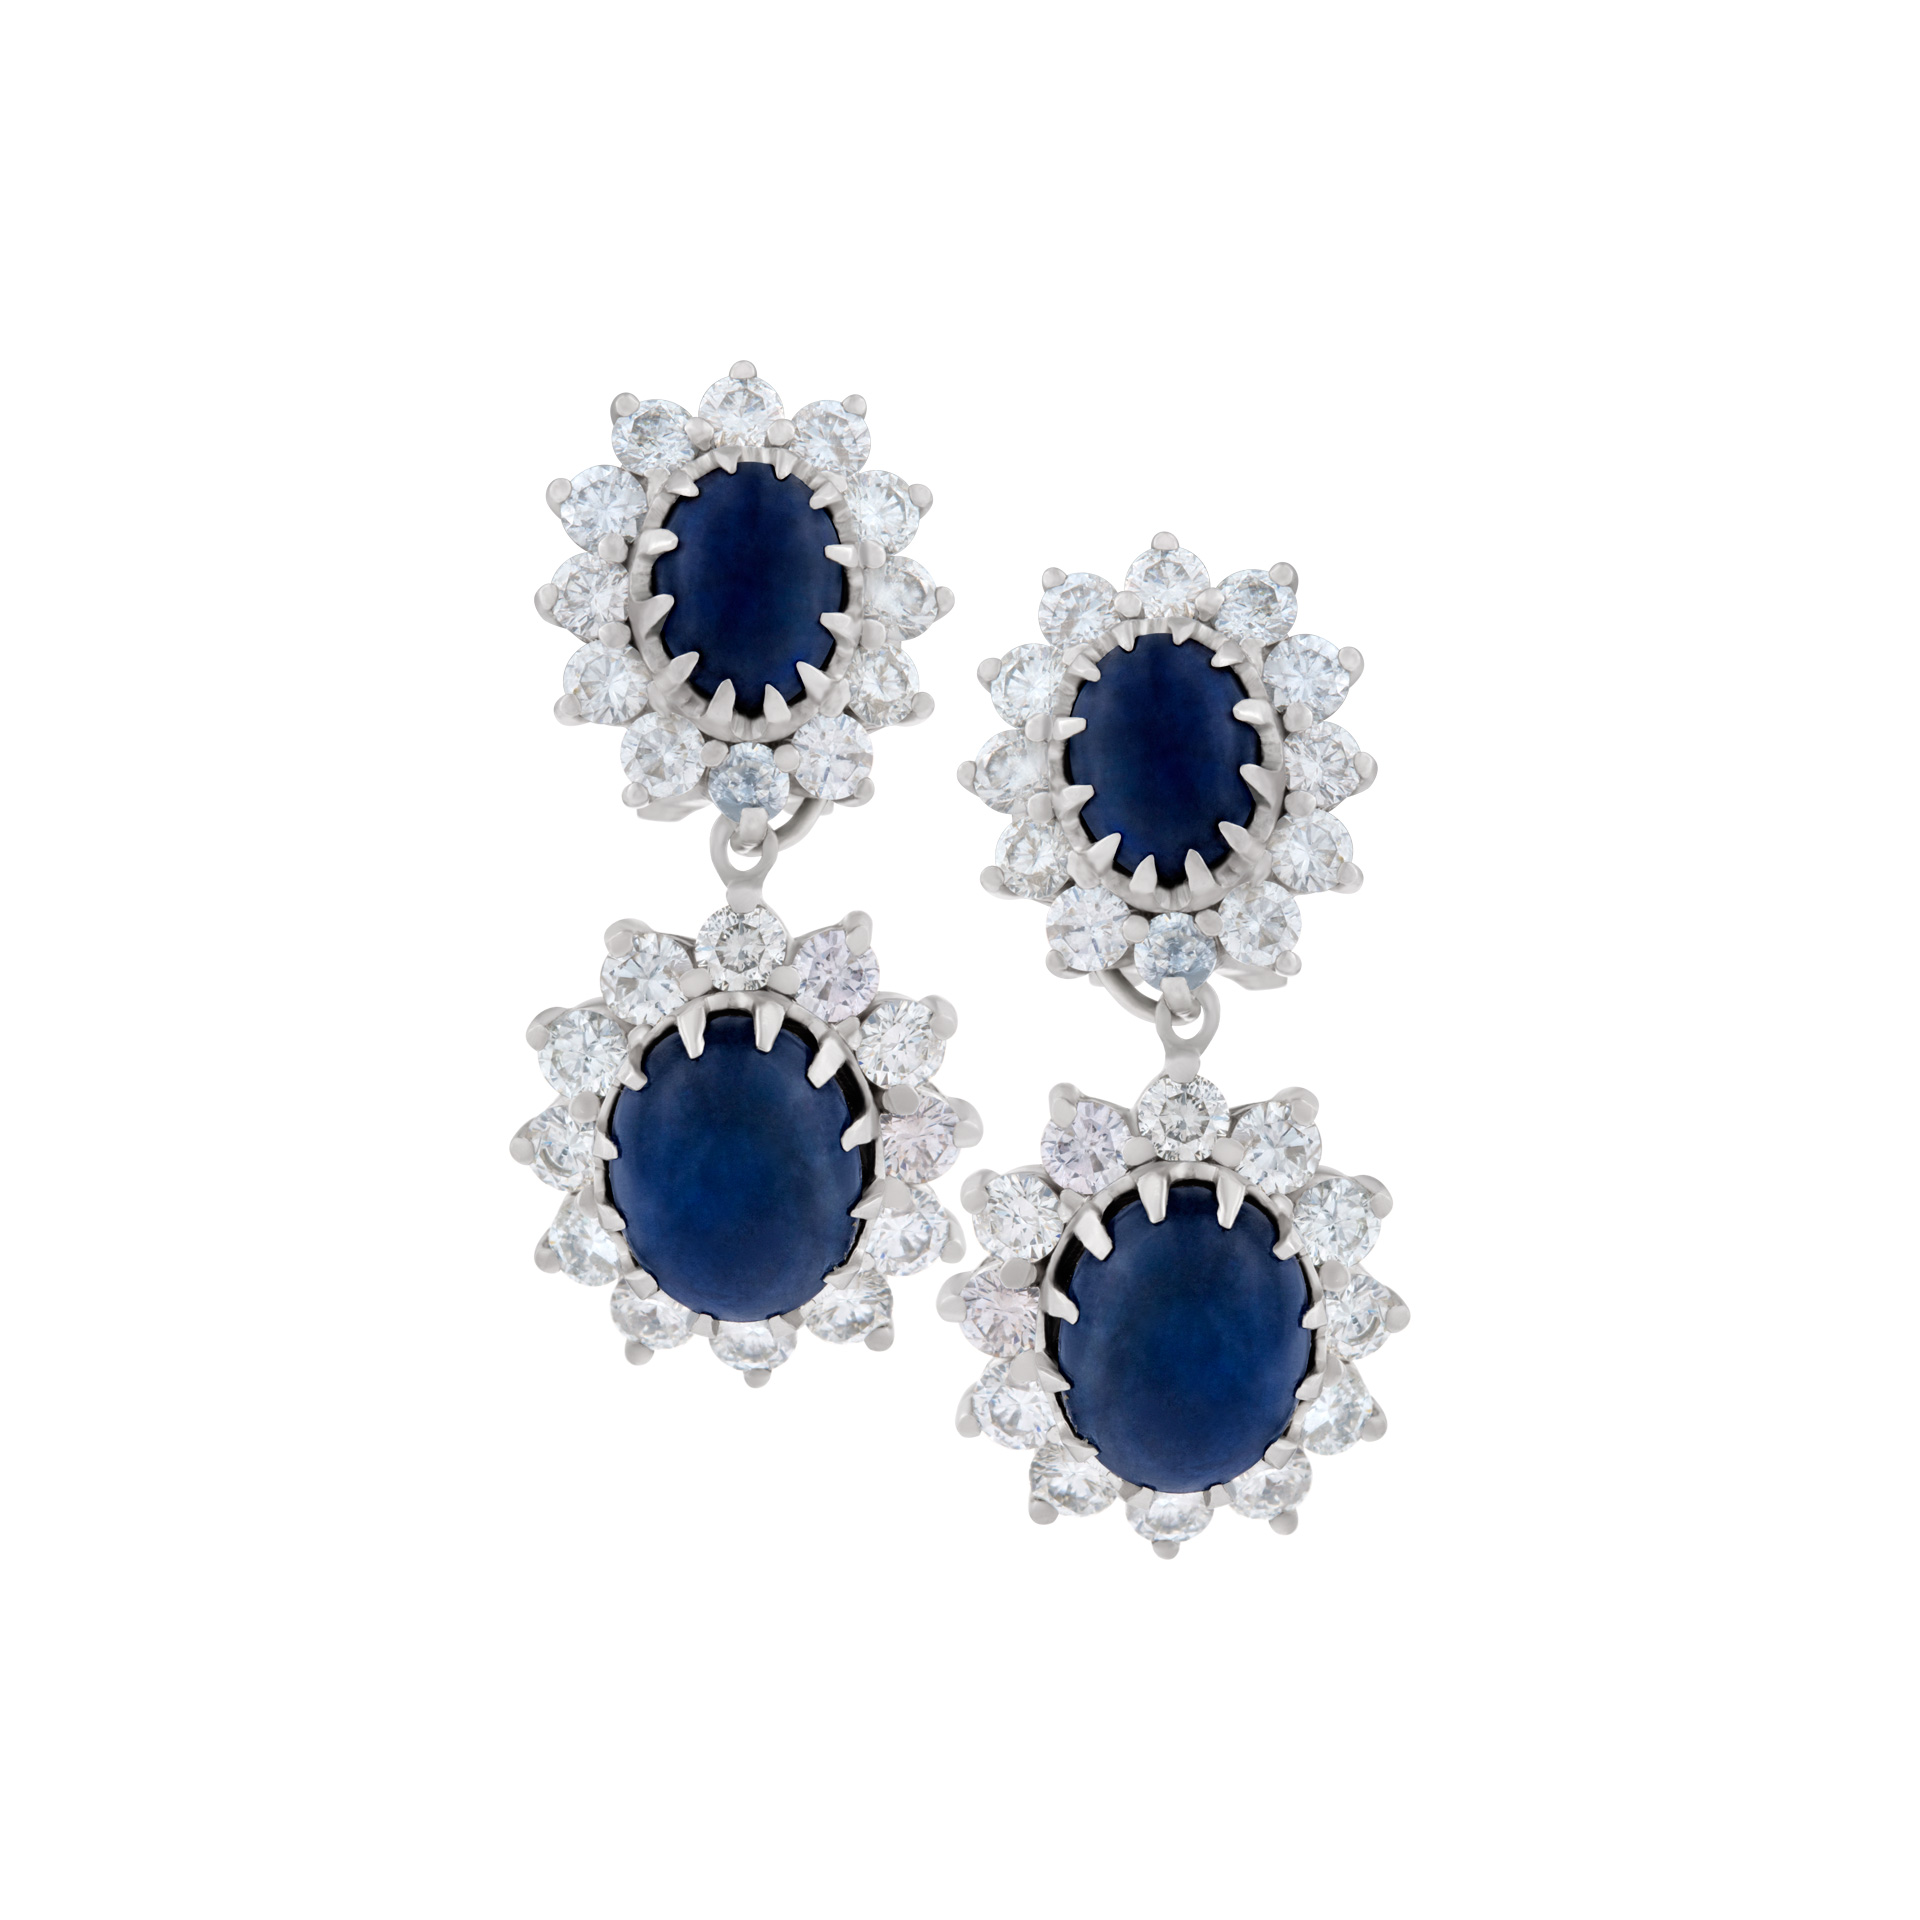 Diamond and Cabochon Sapphire earrings in 18k white gold image 1